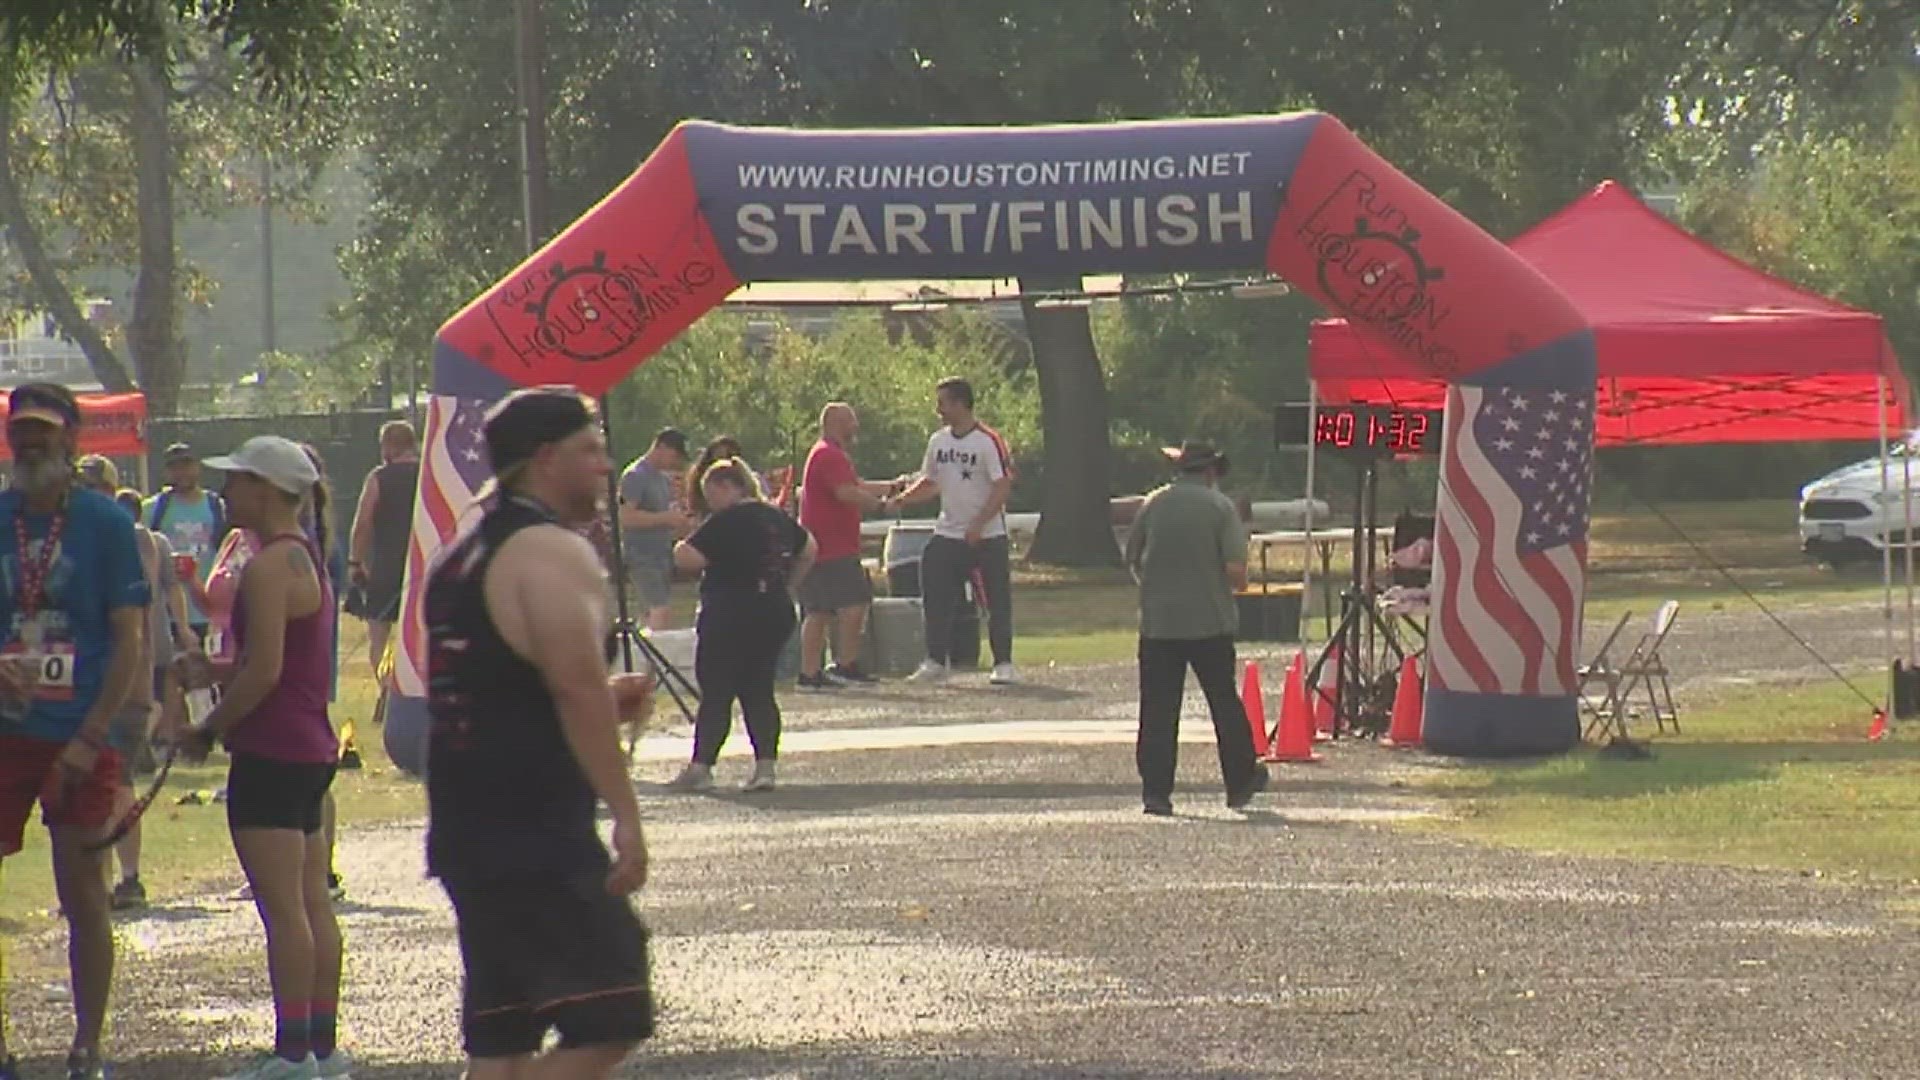 Participants had an hour to finish the run through the streets of Port Neches. 28-year-old Hayden Lightfoot completed the 5K in less than 18 minutes.